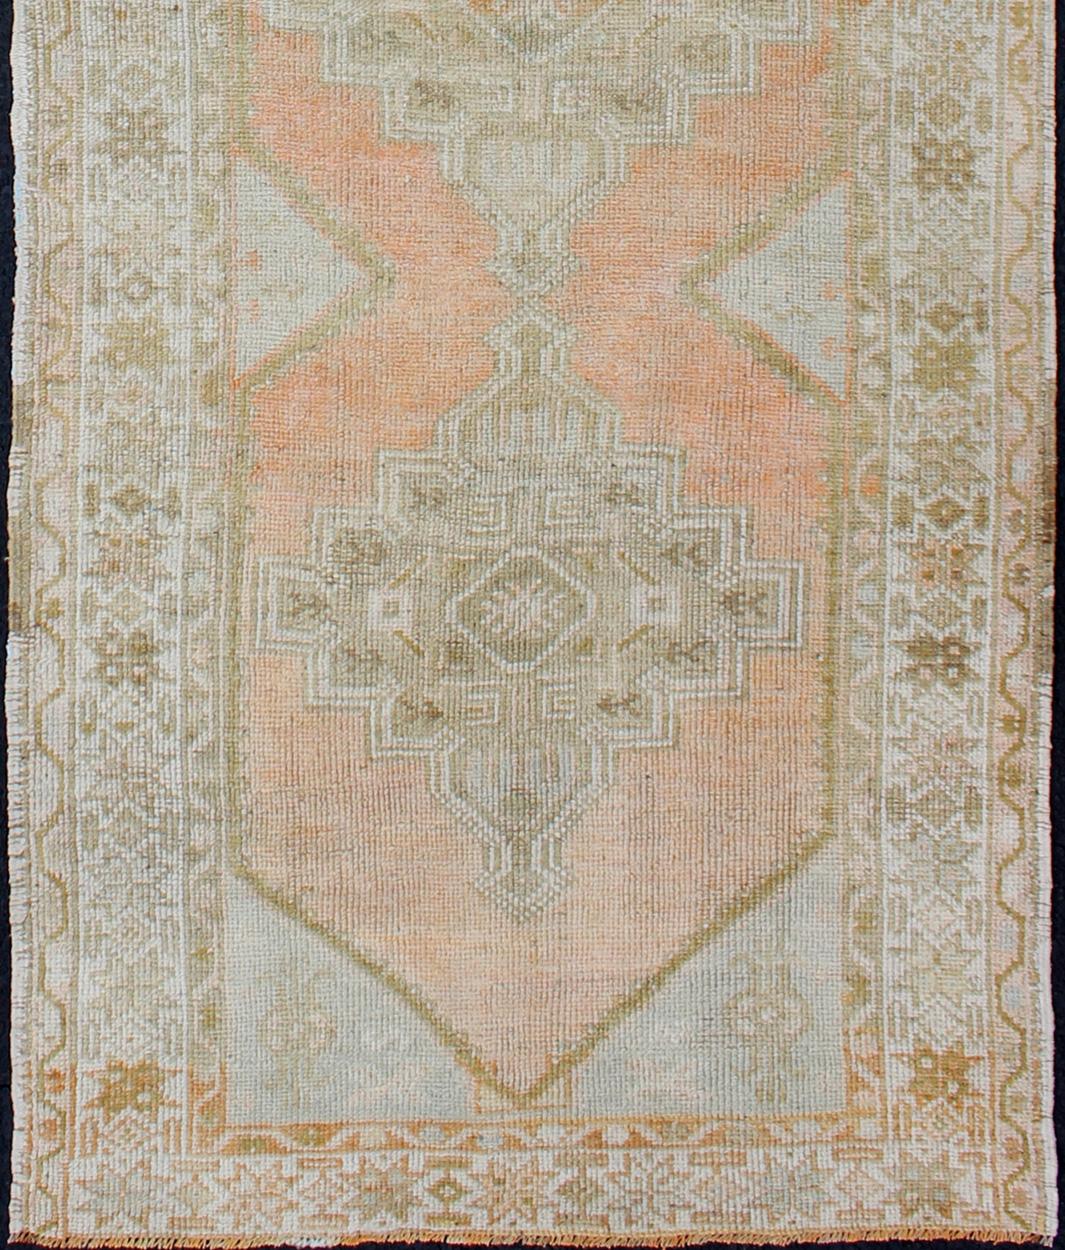 Turkish Oushak vintage carpet with geometric medallion design in faded coral, Green colors. Keivan Woven Arts  rug en-176277, country of origin / type: Turkey / Oushak, circa 1940

This Oushak rug from Turkey features a multi-medallion design